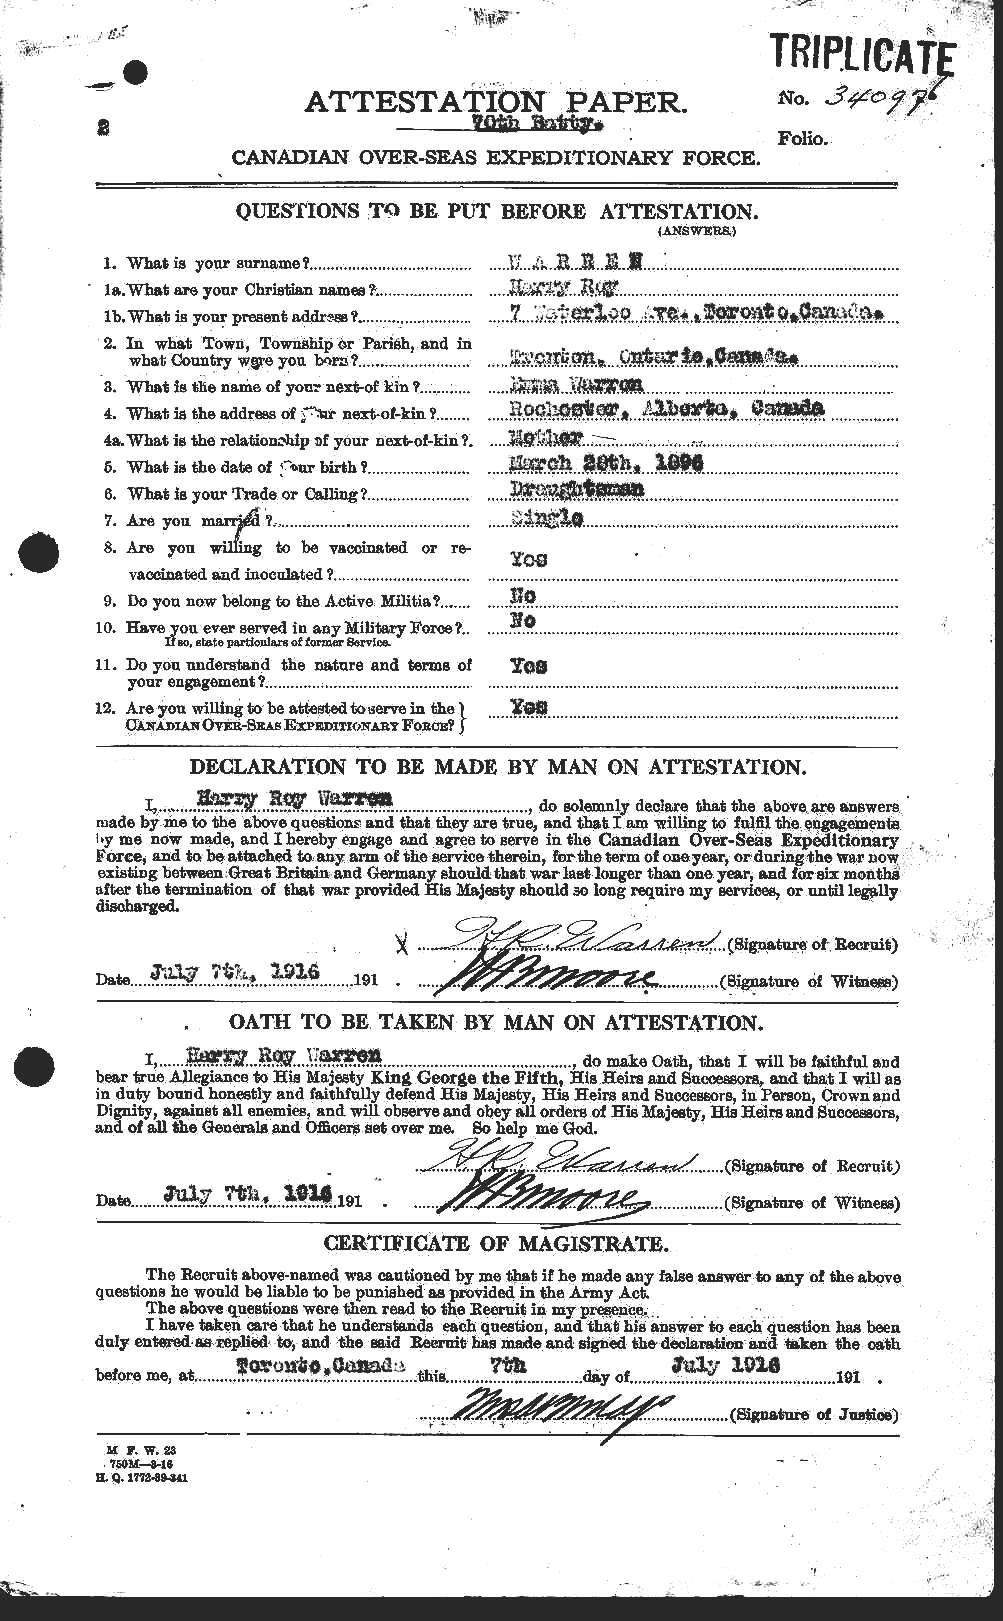 Personnel Records of the First World War - CEF 658489a